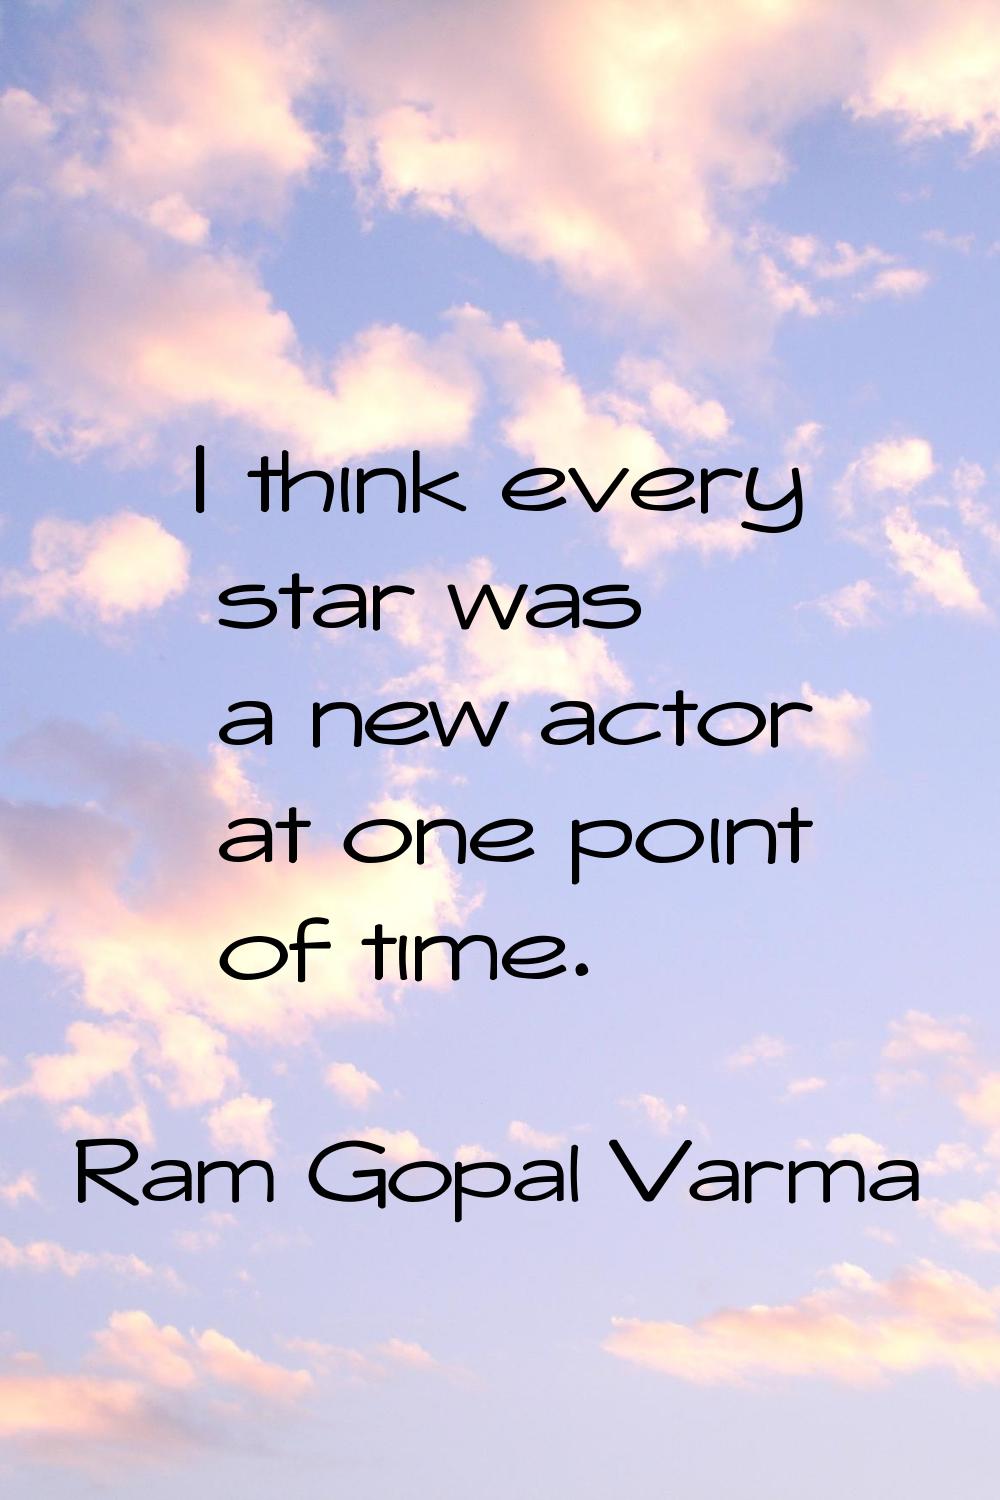 I think every star was a new actor at one point of time.